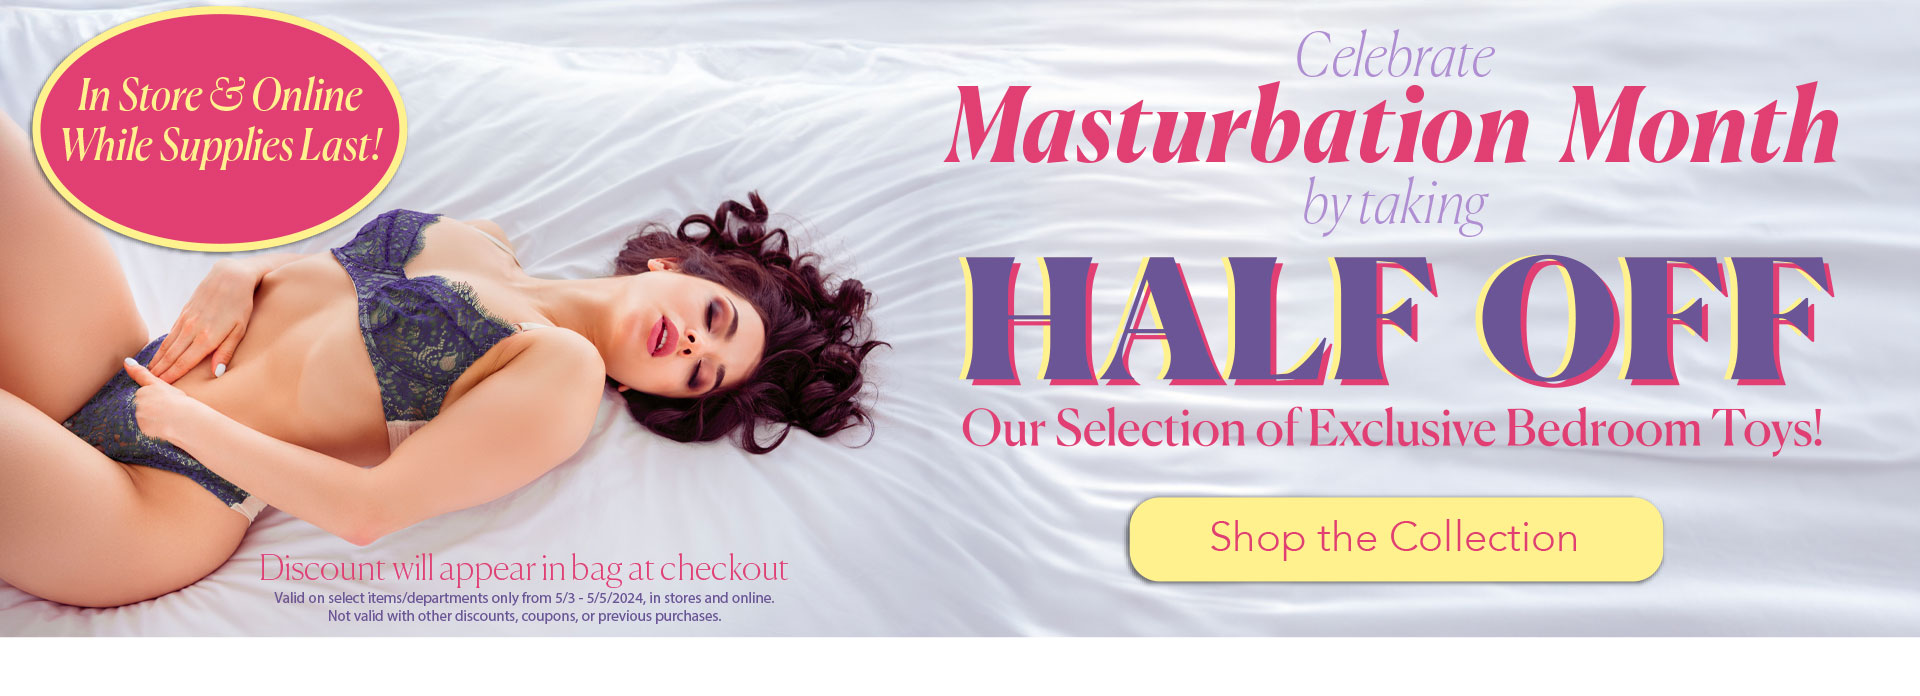 Celebrate Masturbation Month by taking HALF OFF our selection of Exclusive Bedroom Toys! - Shop the Collection